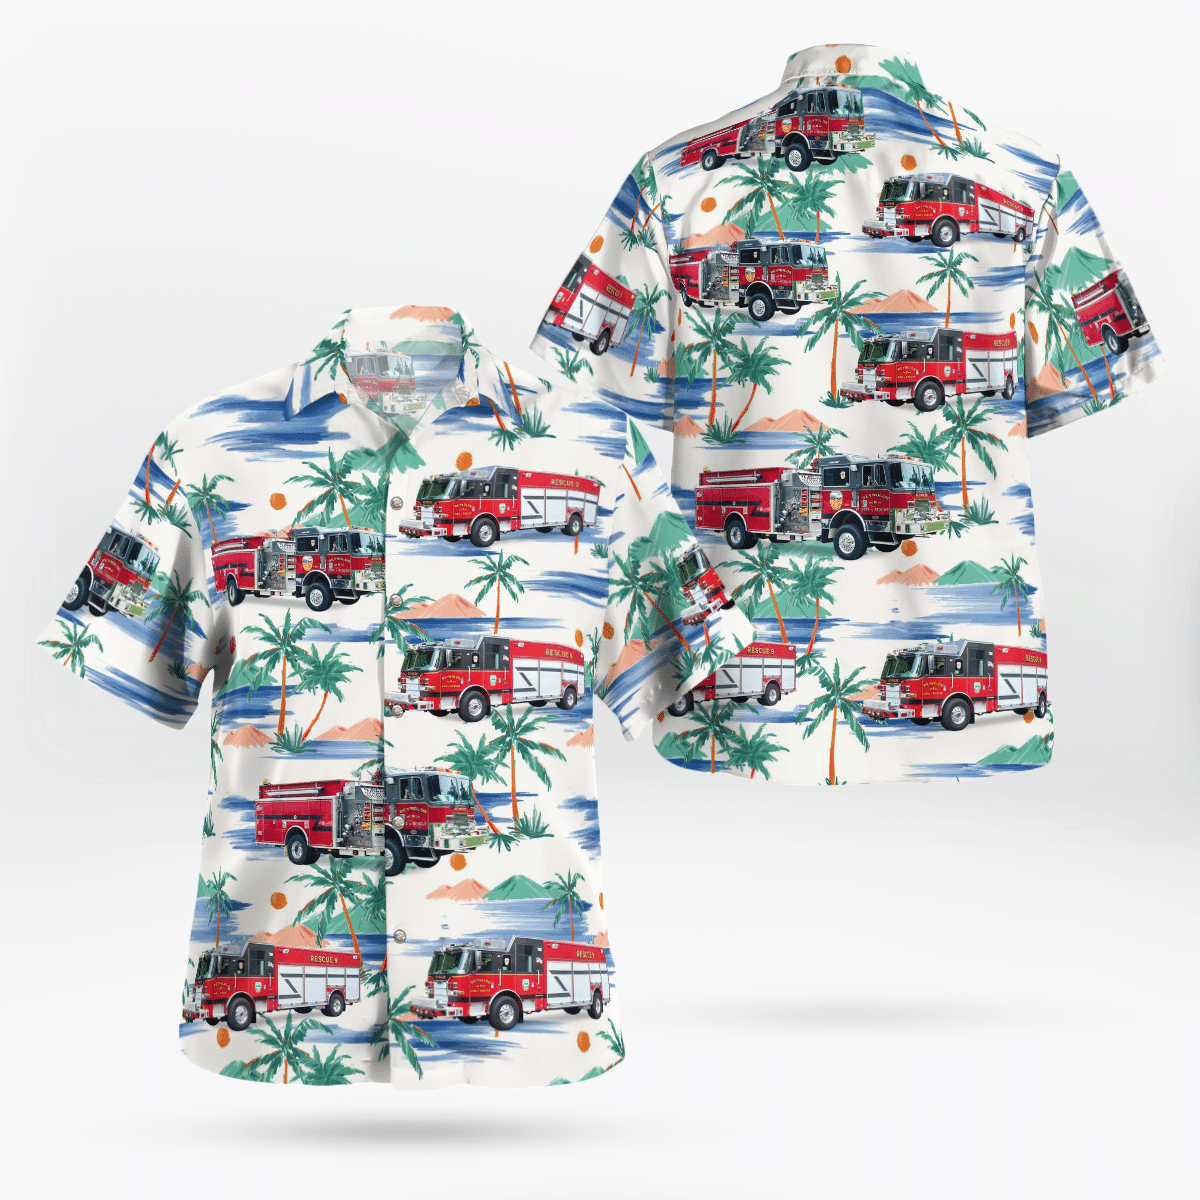 Shop now to find the perfect Hawaii Shirt for your hobby 144